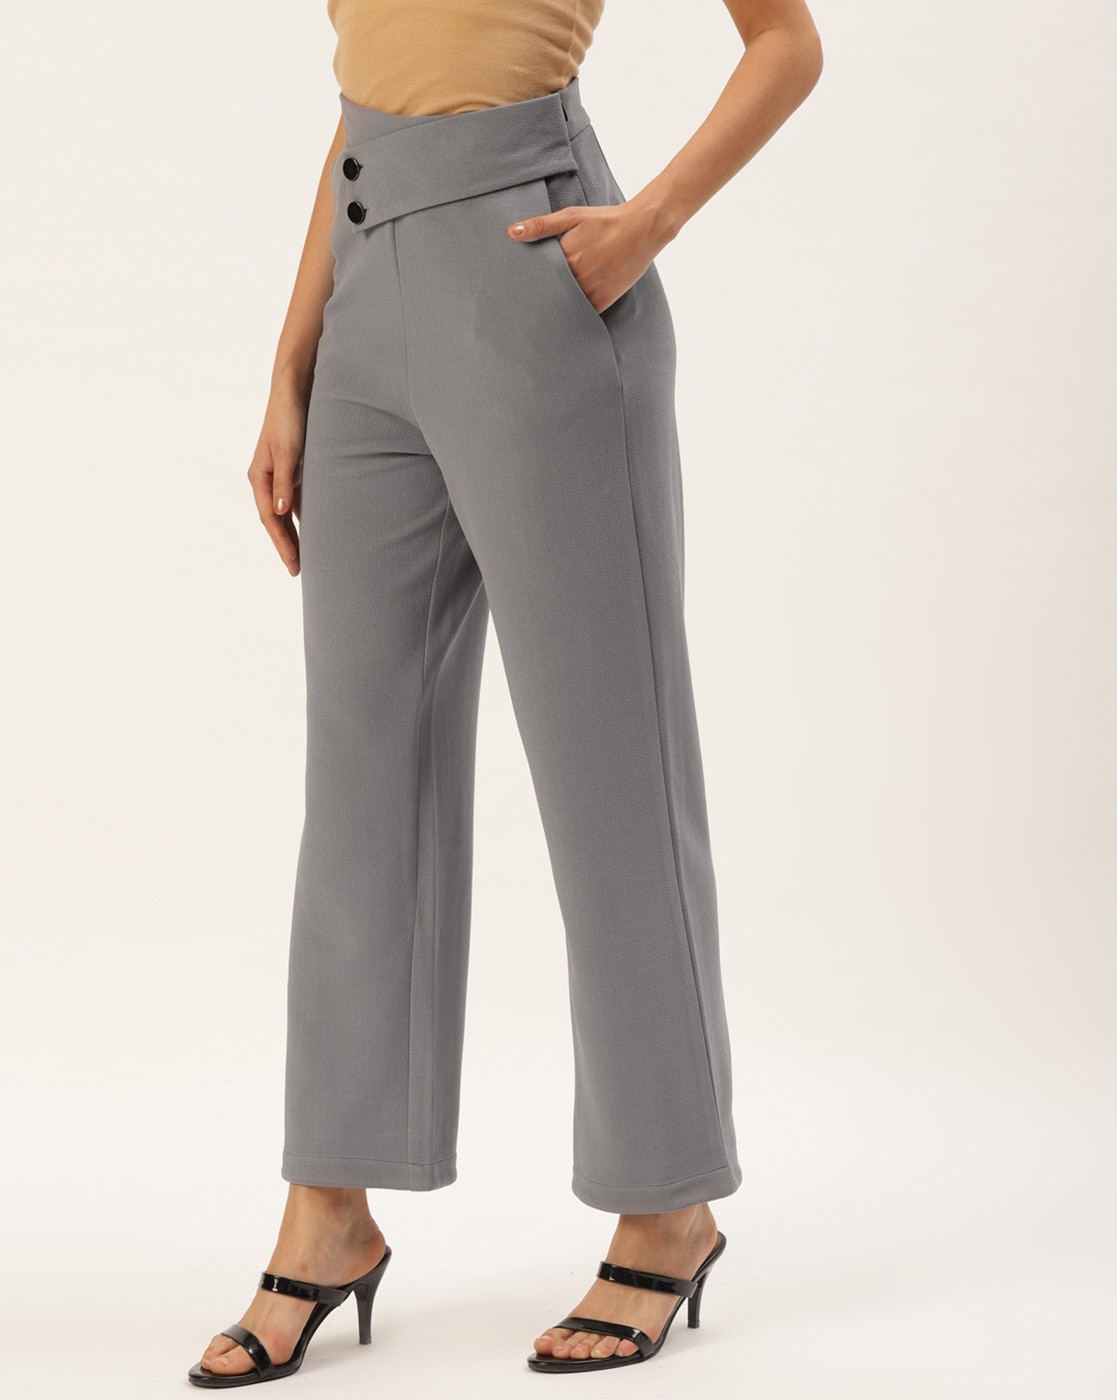 Buy Brown Trousers & Pants for Women by Outryt Online | Ajio.com-saigonsouth.com.vn